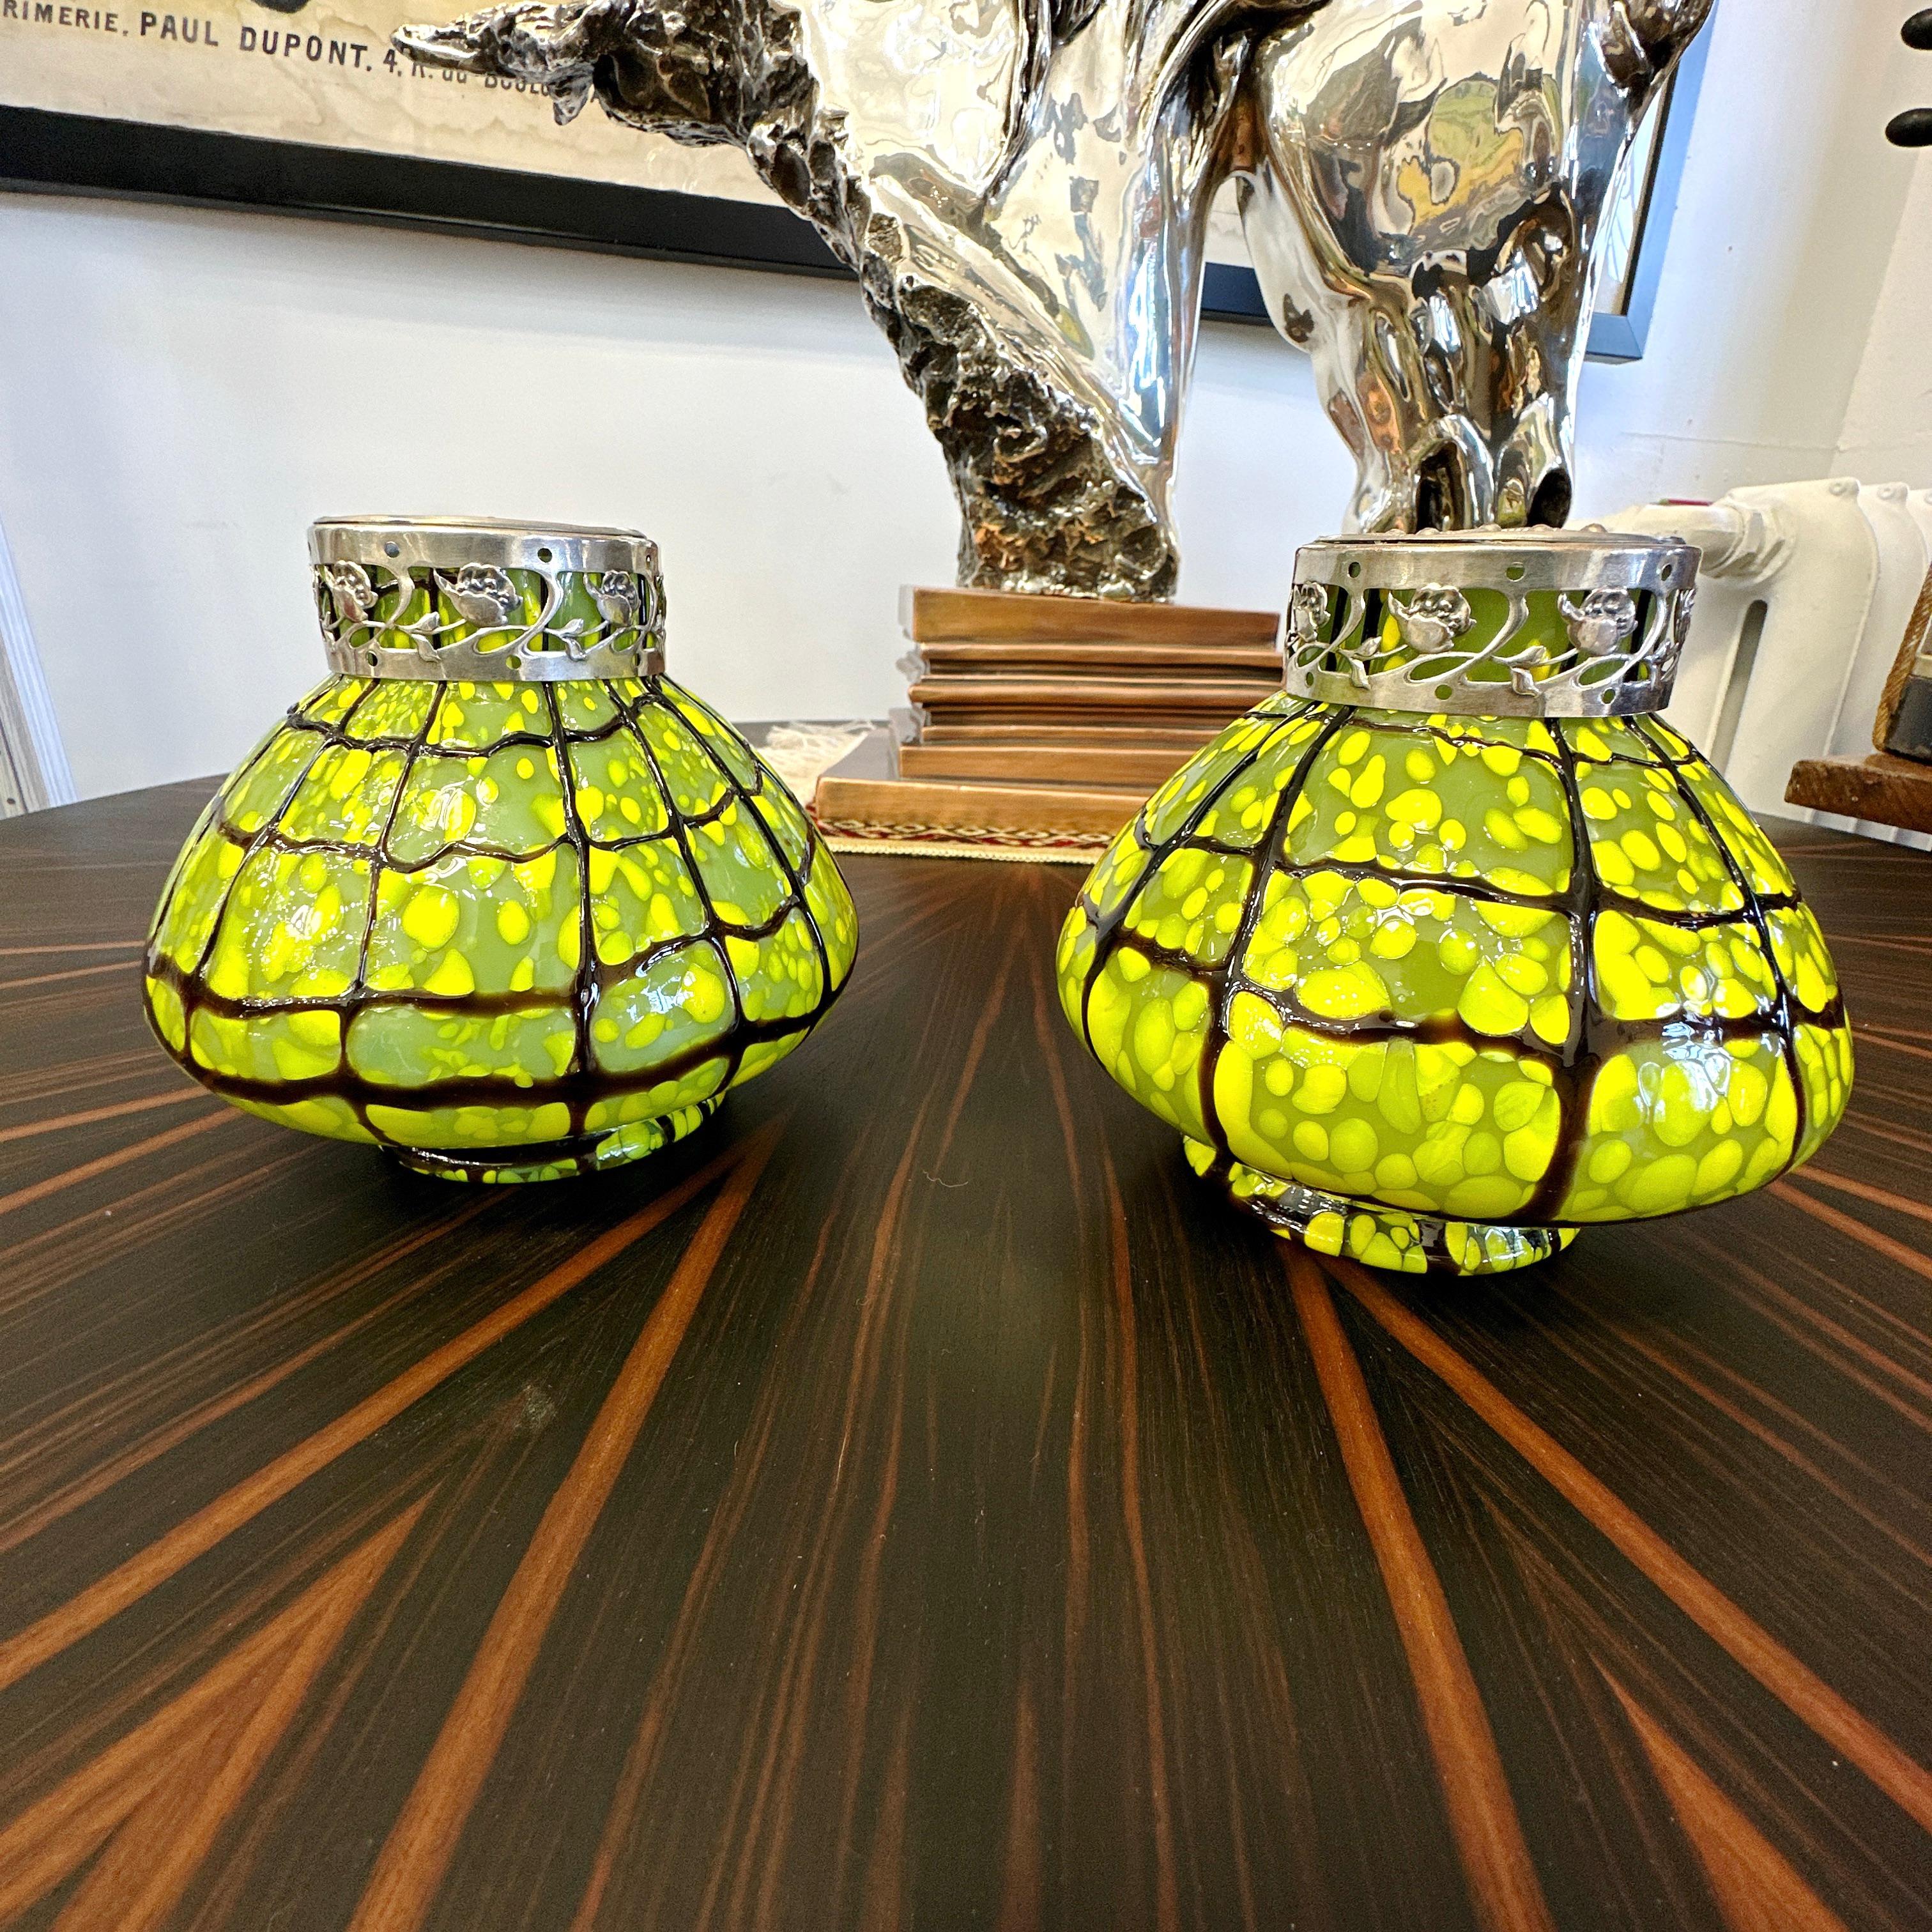 Here is a beautiful pair of Pair of Ernst Steinwald and Co. Kralik Bohemian VZ 47 Green and Yellow Flower Frog Vases. 

Made in Czechoslovakia (stamped on inside of metal frog), these striking frog style vases are in overall very good condition with